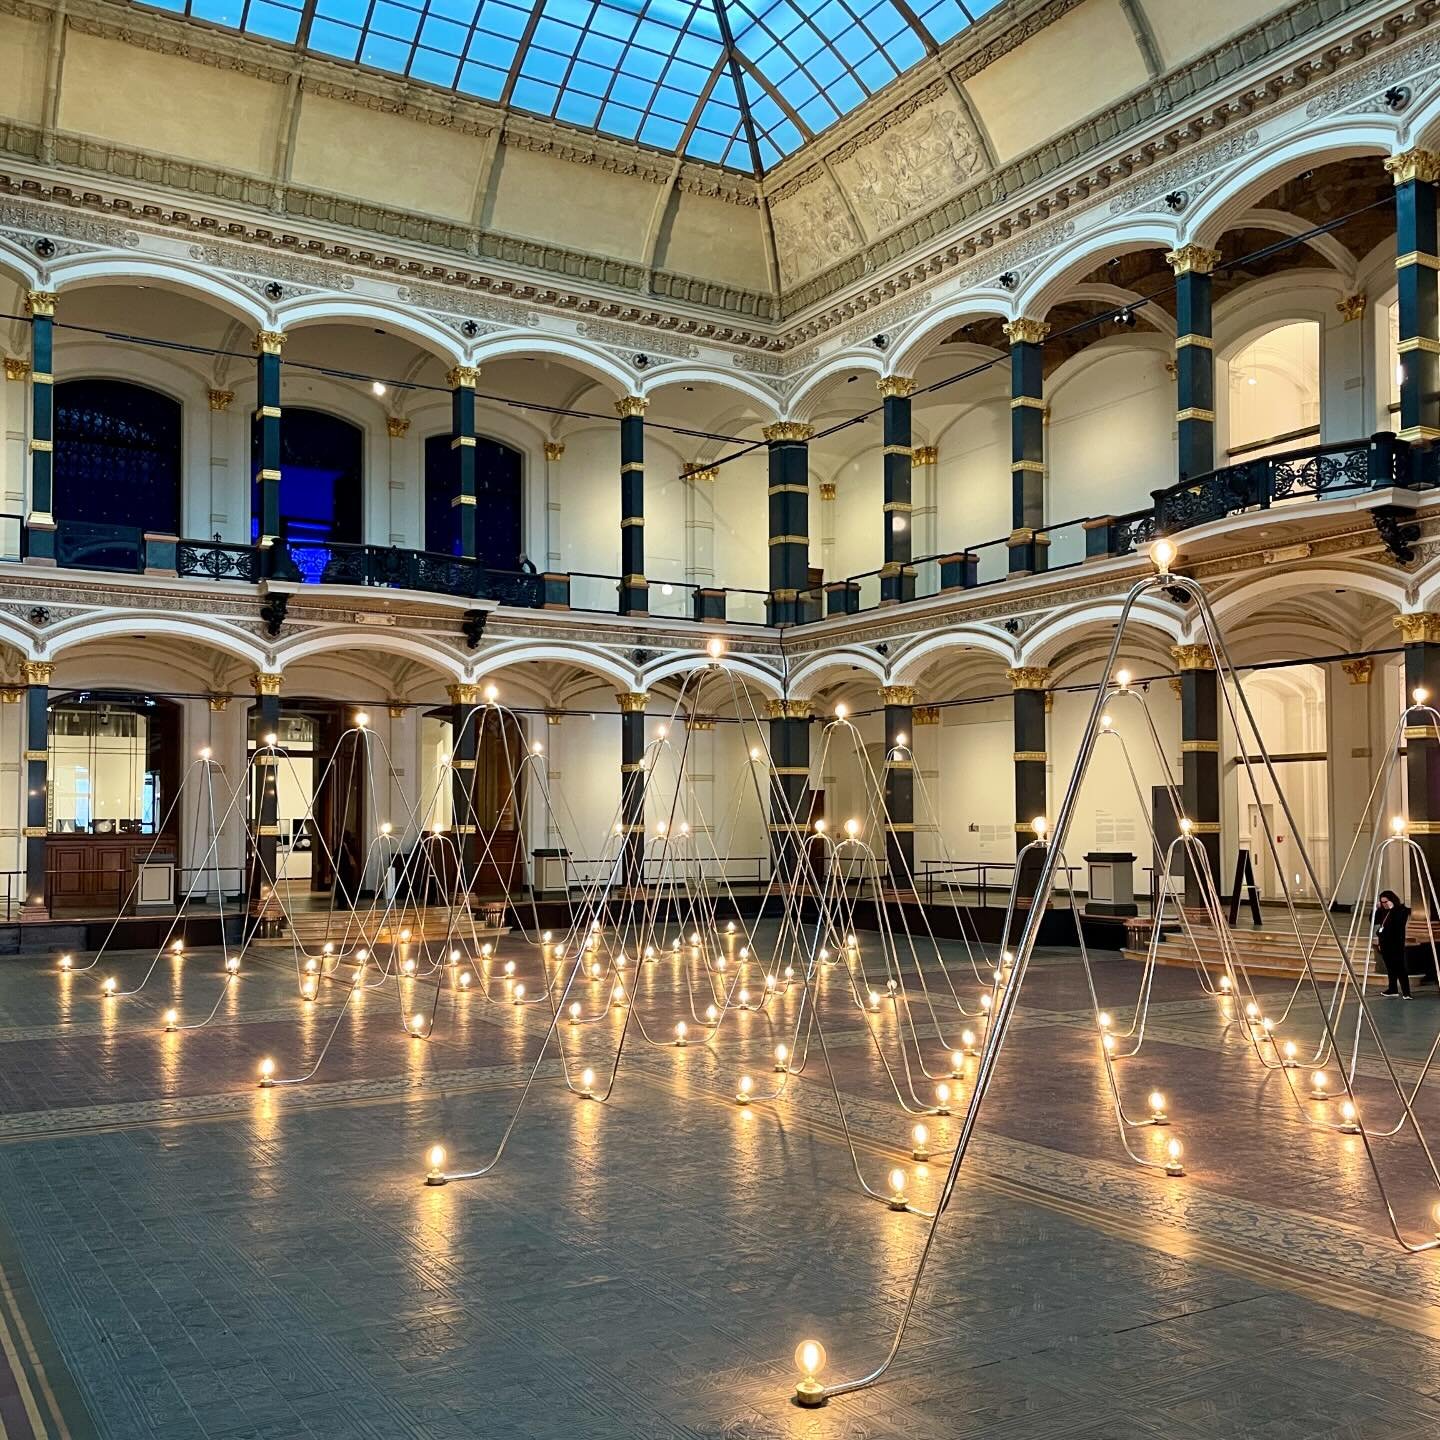 &ldquo;Nancy Holt: Circles of Light&rdquo; at Gropius Bau &mdash; so much unknown (to me) about such a well-known artist. I love her text-based works and audio tours that make one more aware of the visual environment &mdash; slowing down, listening, 